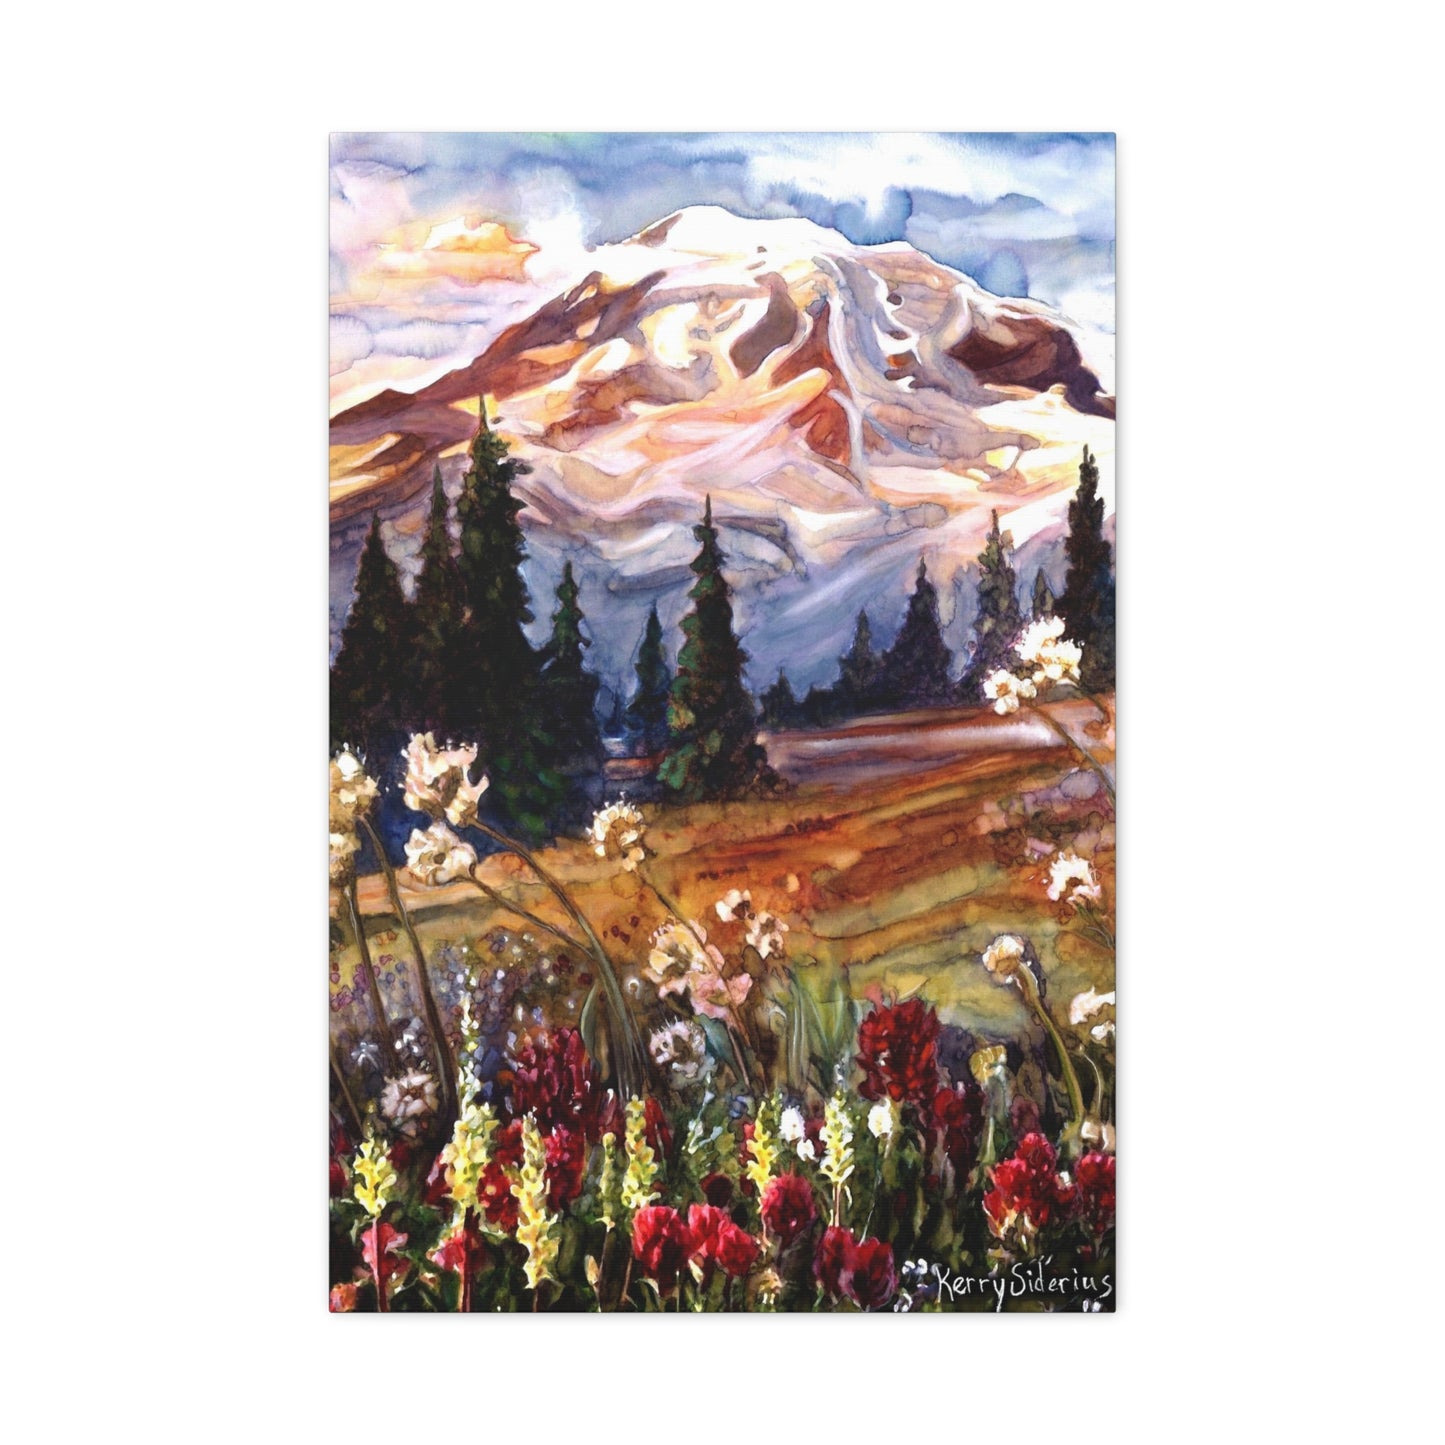 "Rainier" Gallery Wrapped Canvas (20x30) - Kerry Siderius Art 